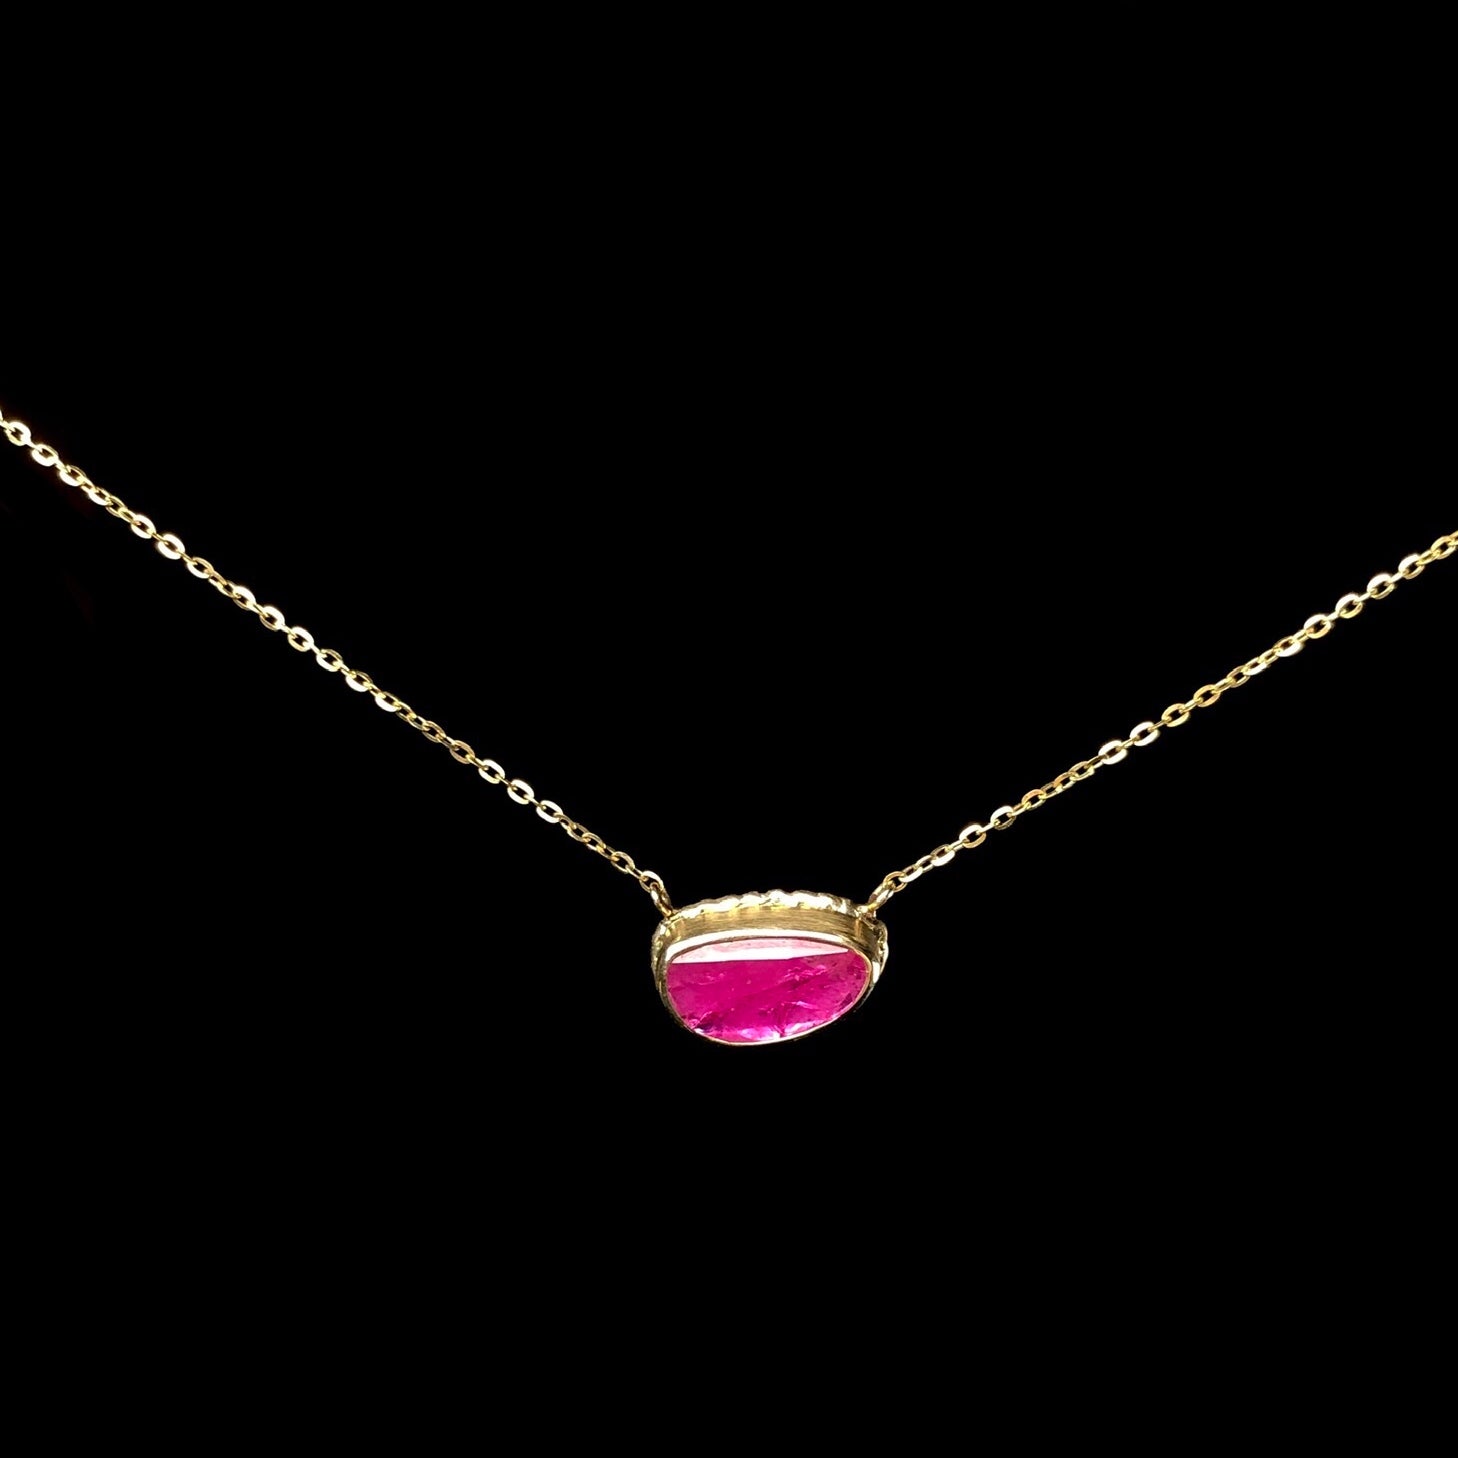 Front view of pink stone necklace with gold chain